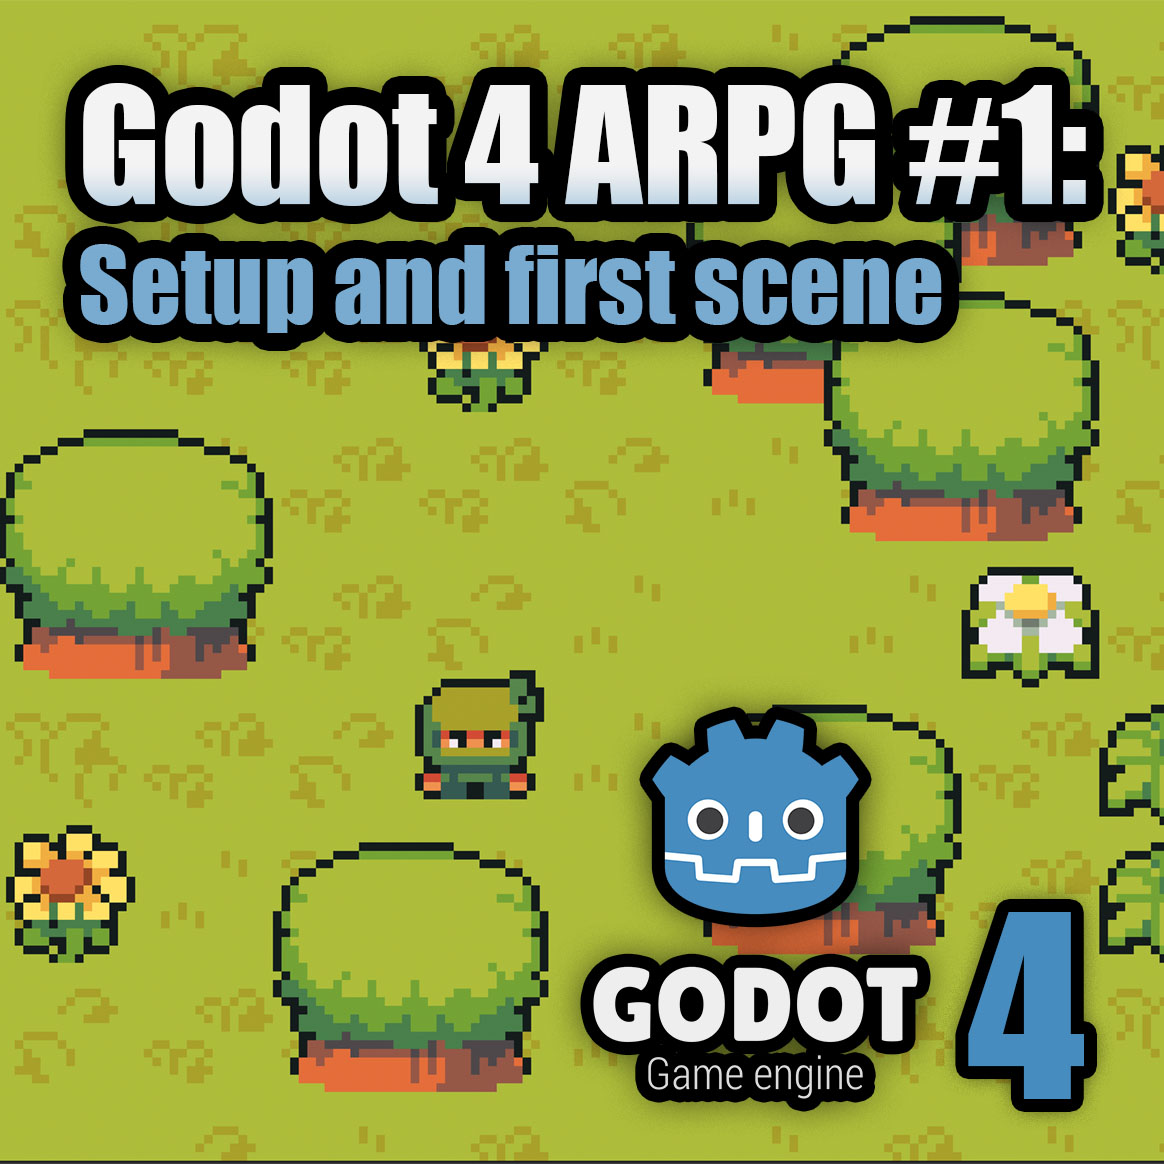 How to make an ARPG in Godot 4 #1: Setup and our first scene